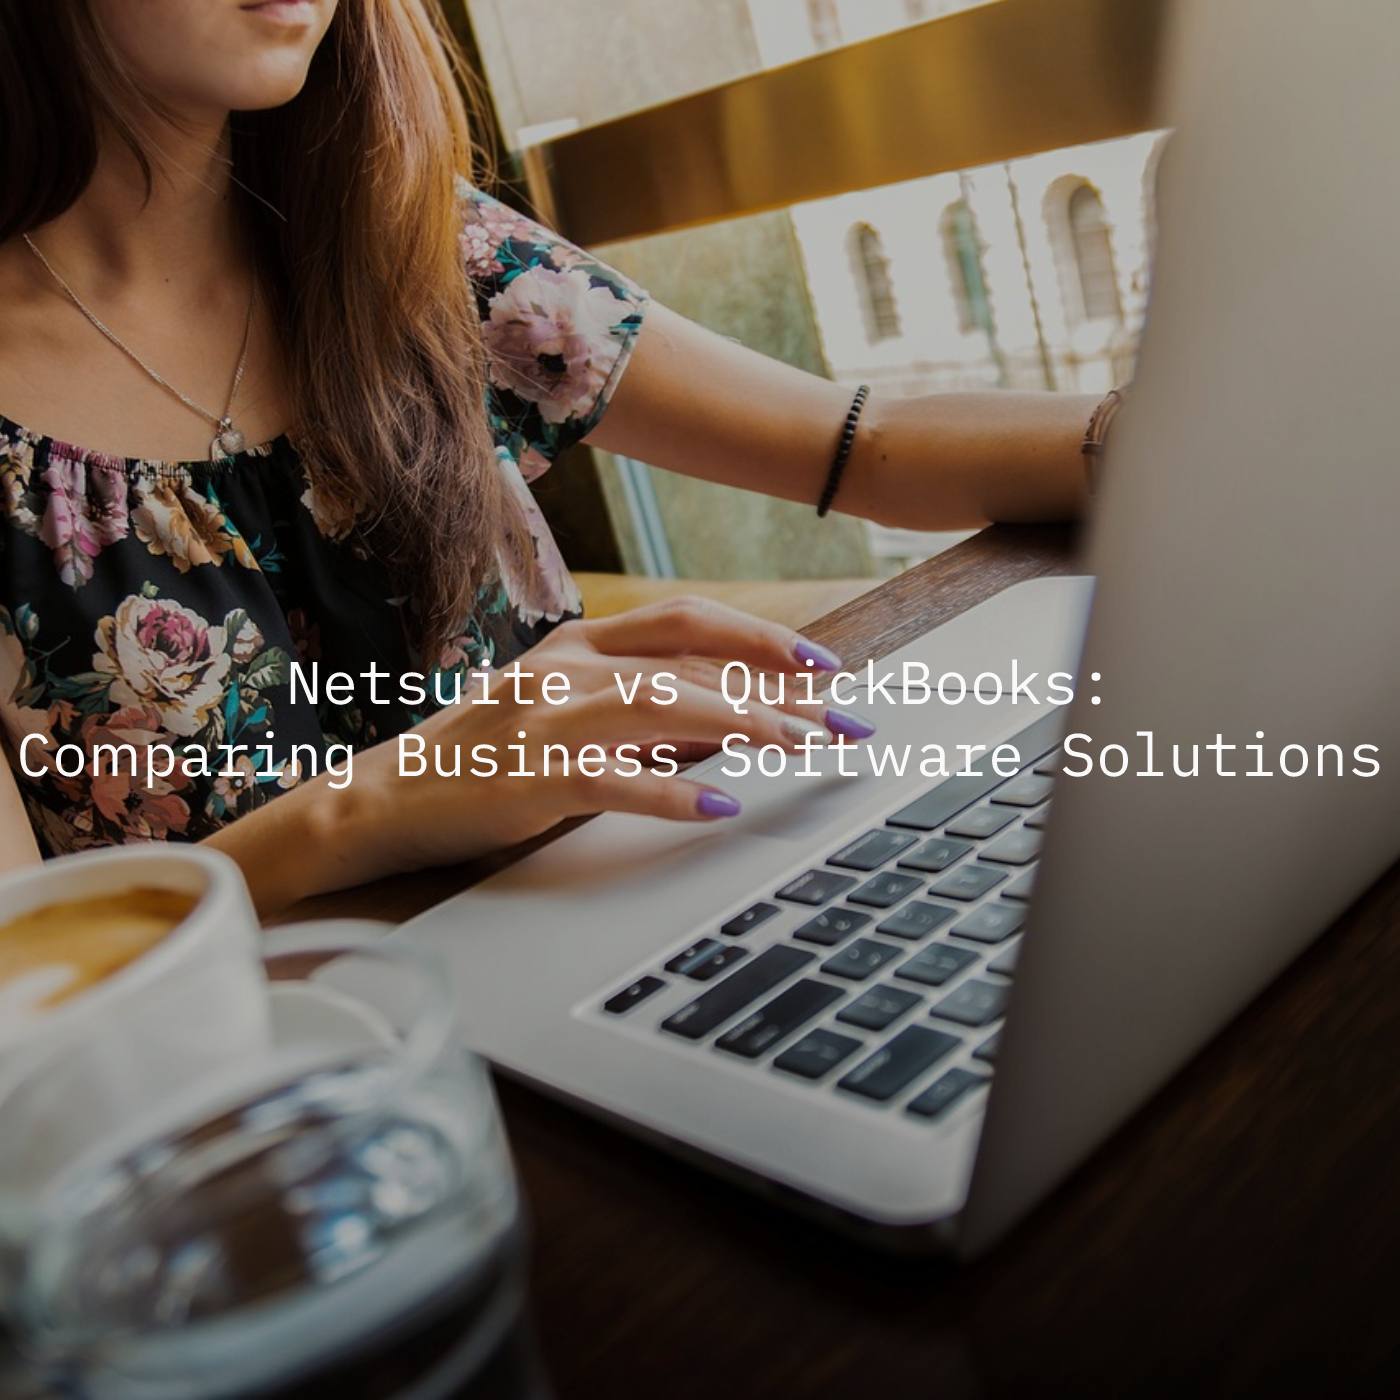 NetSuite vs QuickBooks: Comparing Business Software Solutions